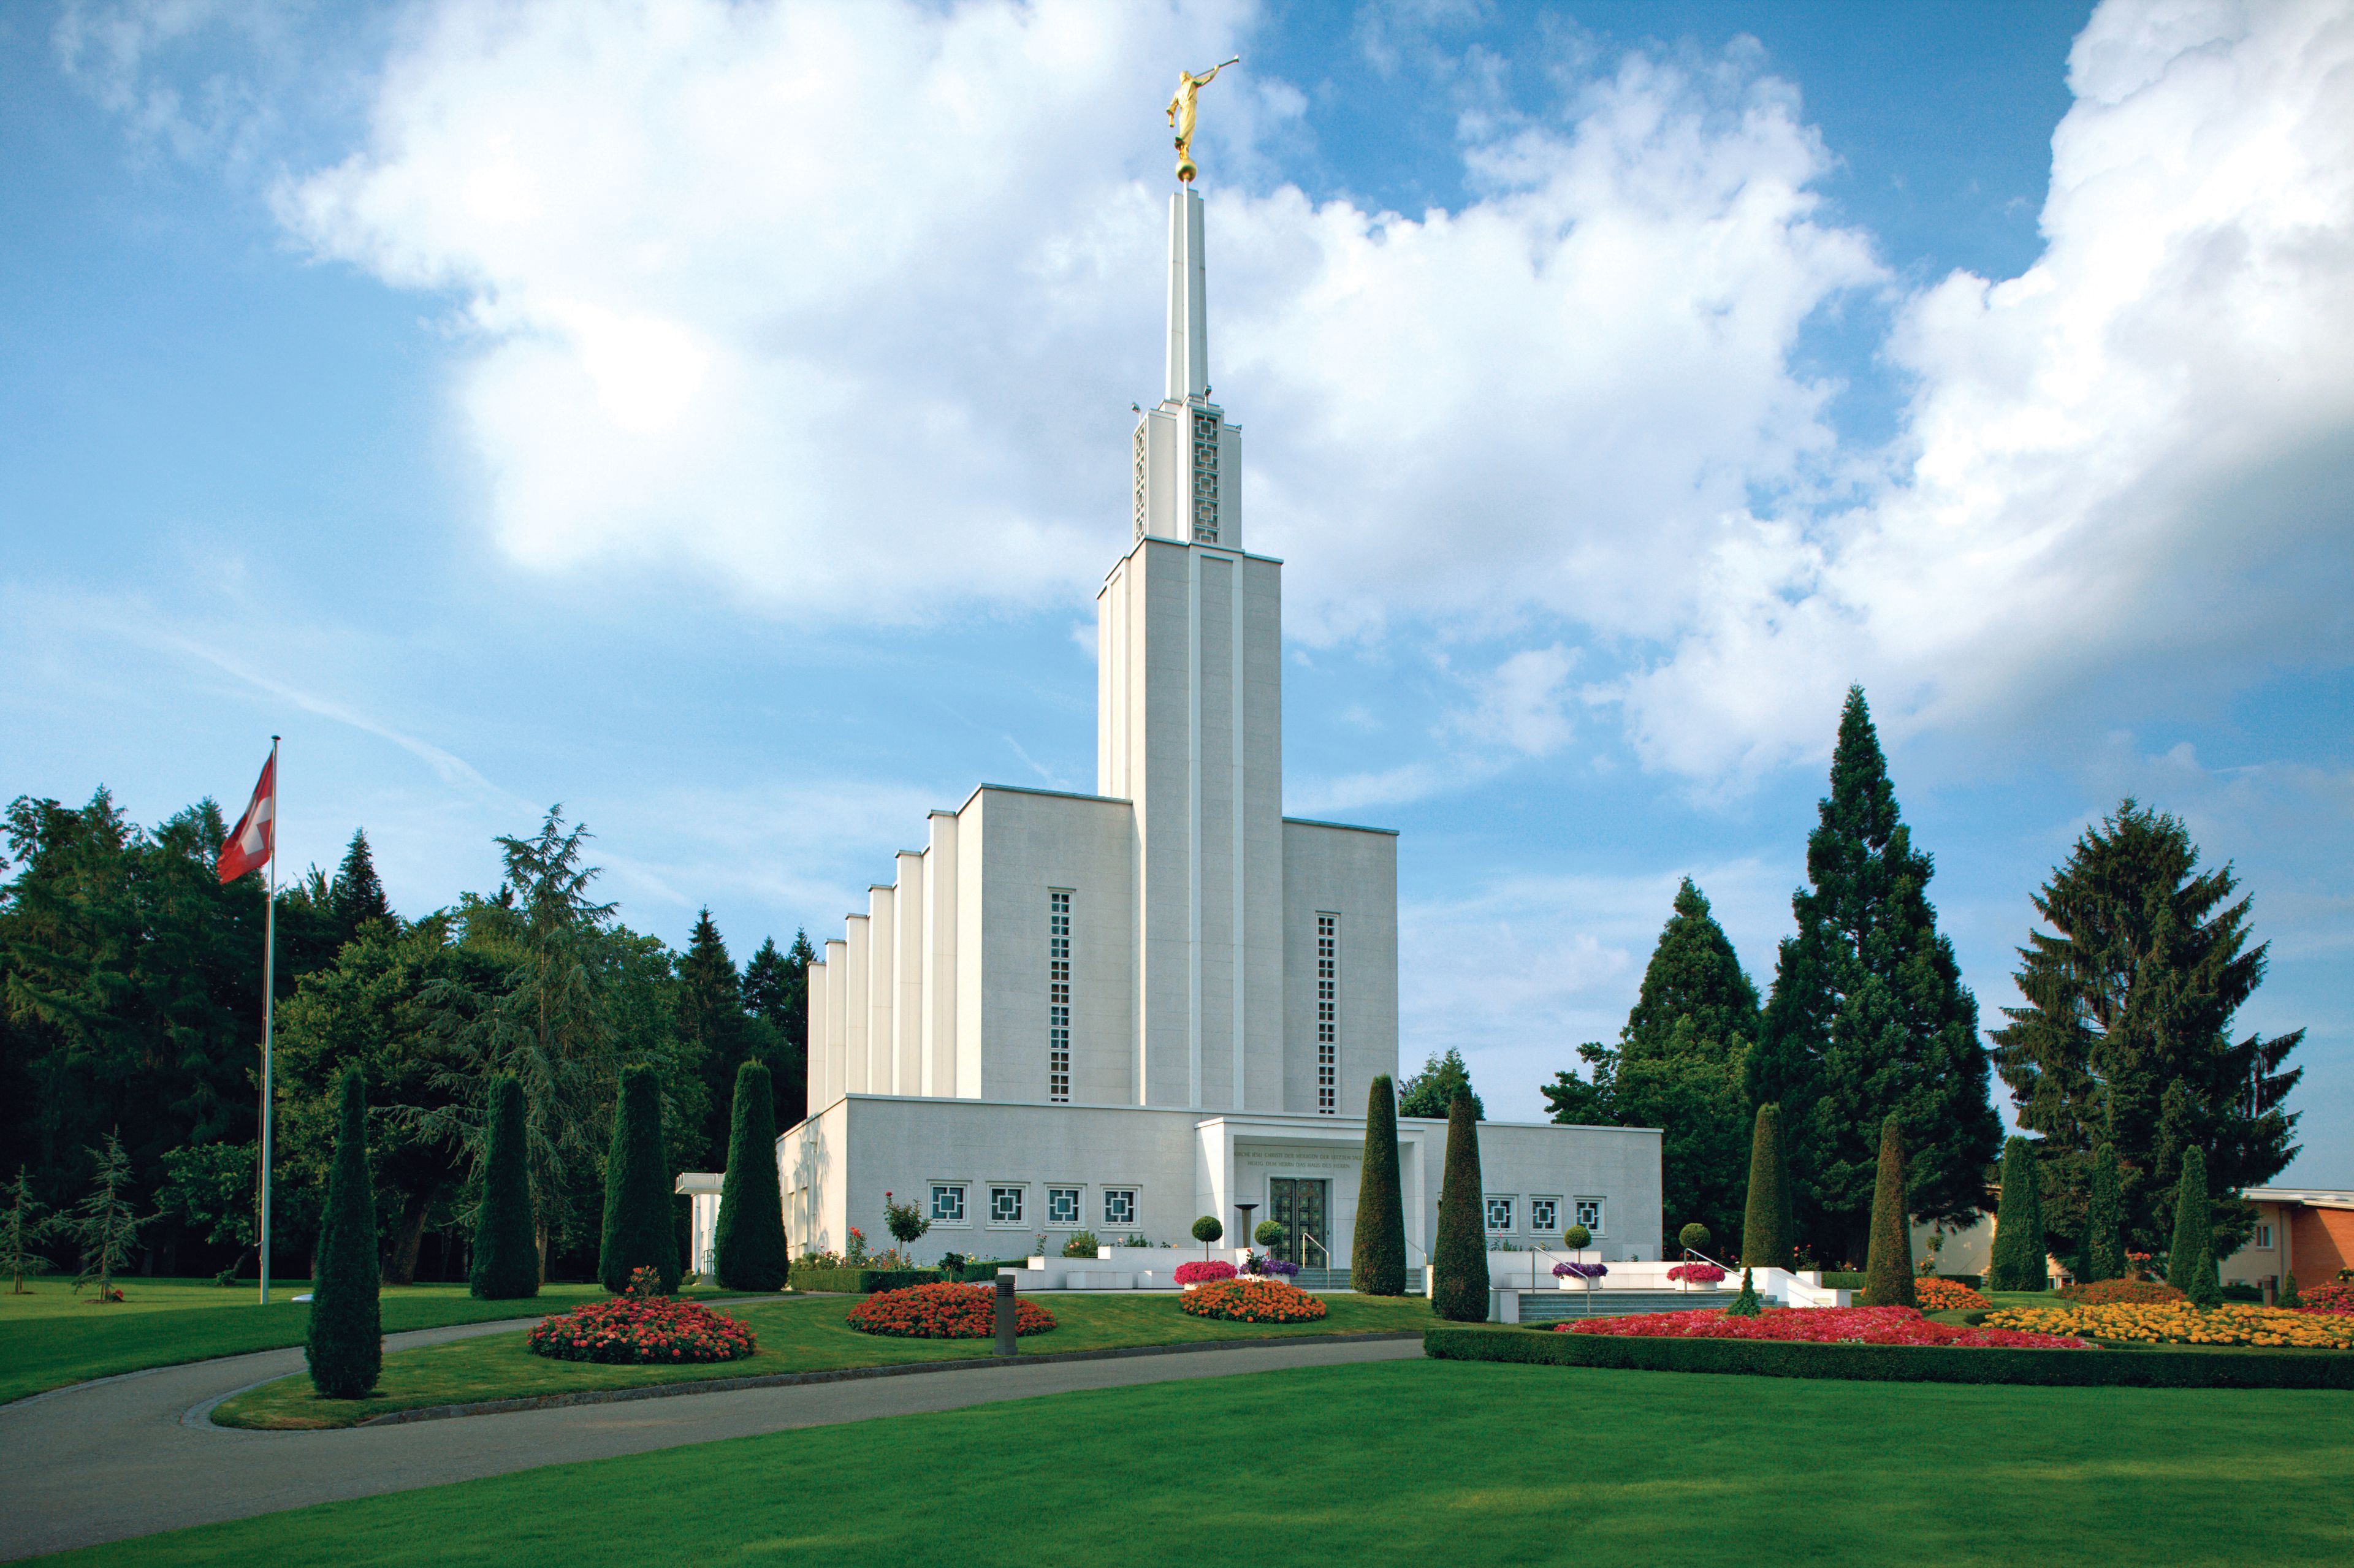 An exterior view of the Bern Switzerland Temple and grounds during the spring.